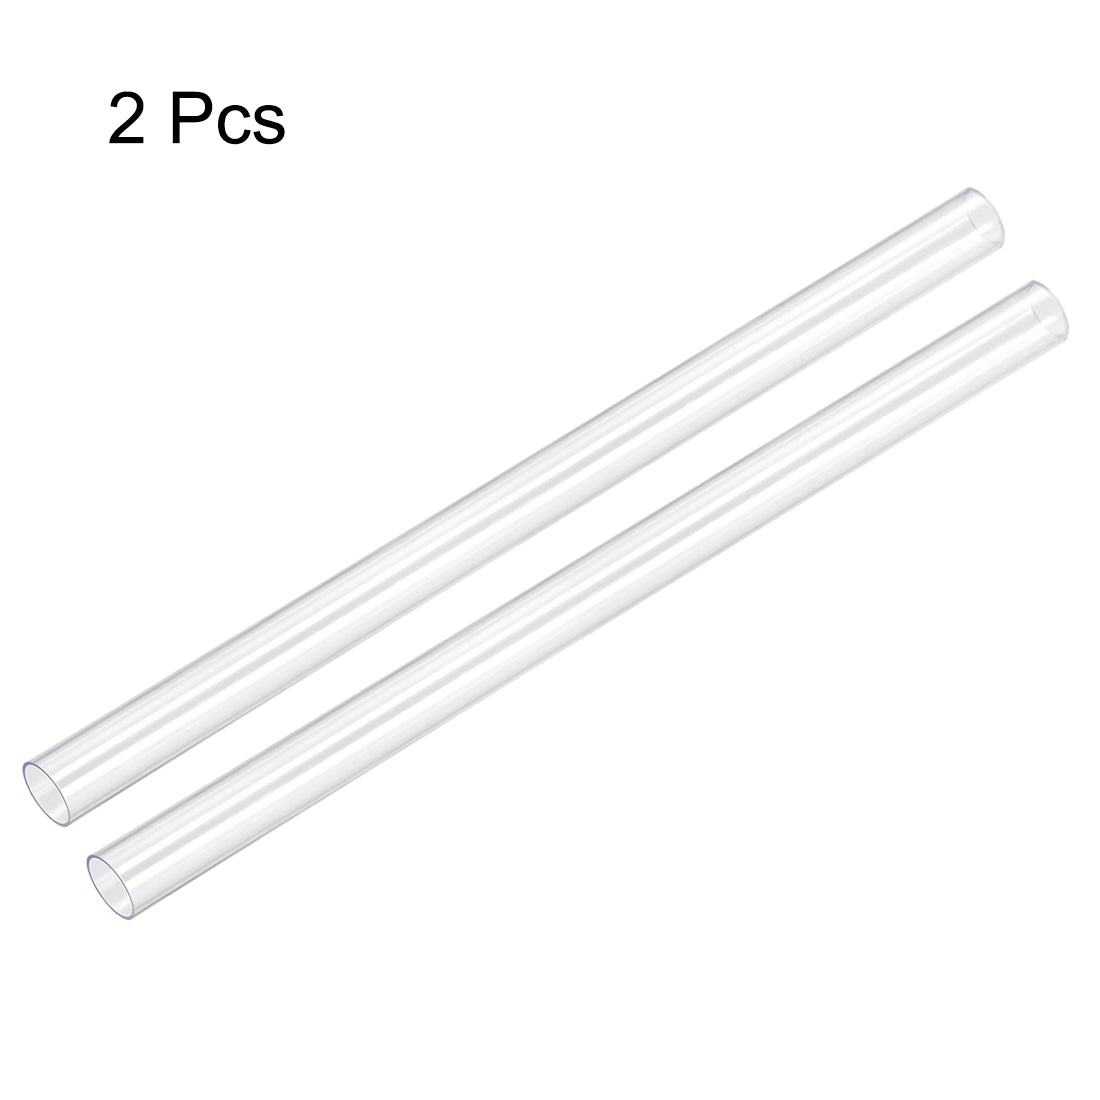 uxcell Uxcell PVC Rigid Round Tubing,Clear,9mm ID x 10mm OD,0.5M/1.64Ft Length,2pcs